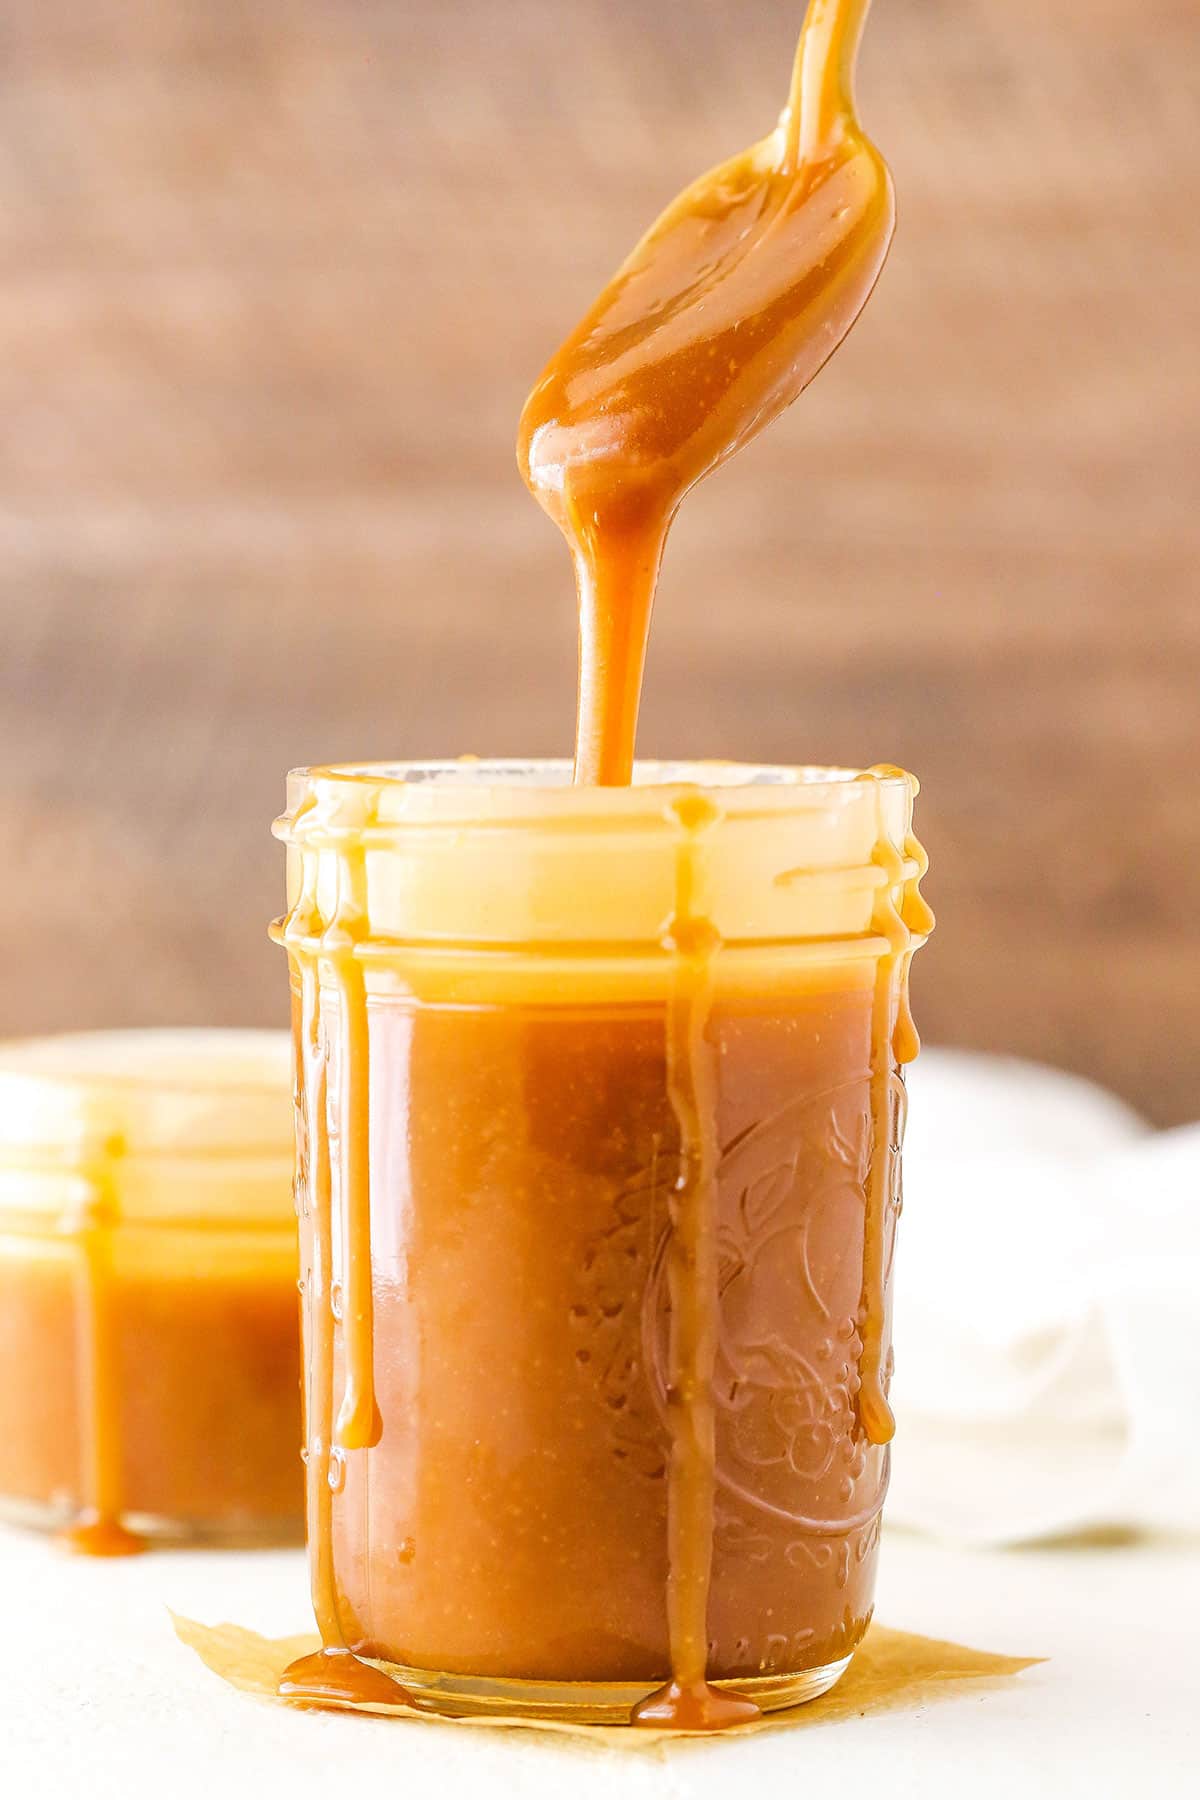 Dripping Salted Caramel Sauce off a spoon into a clear glass jar